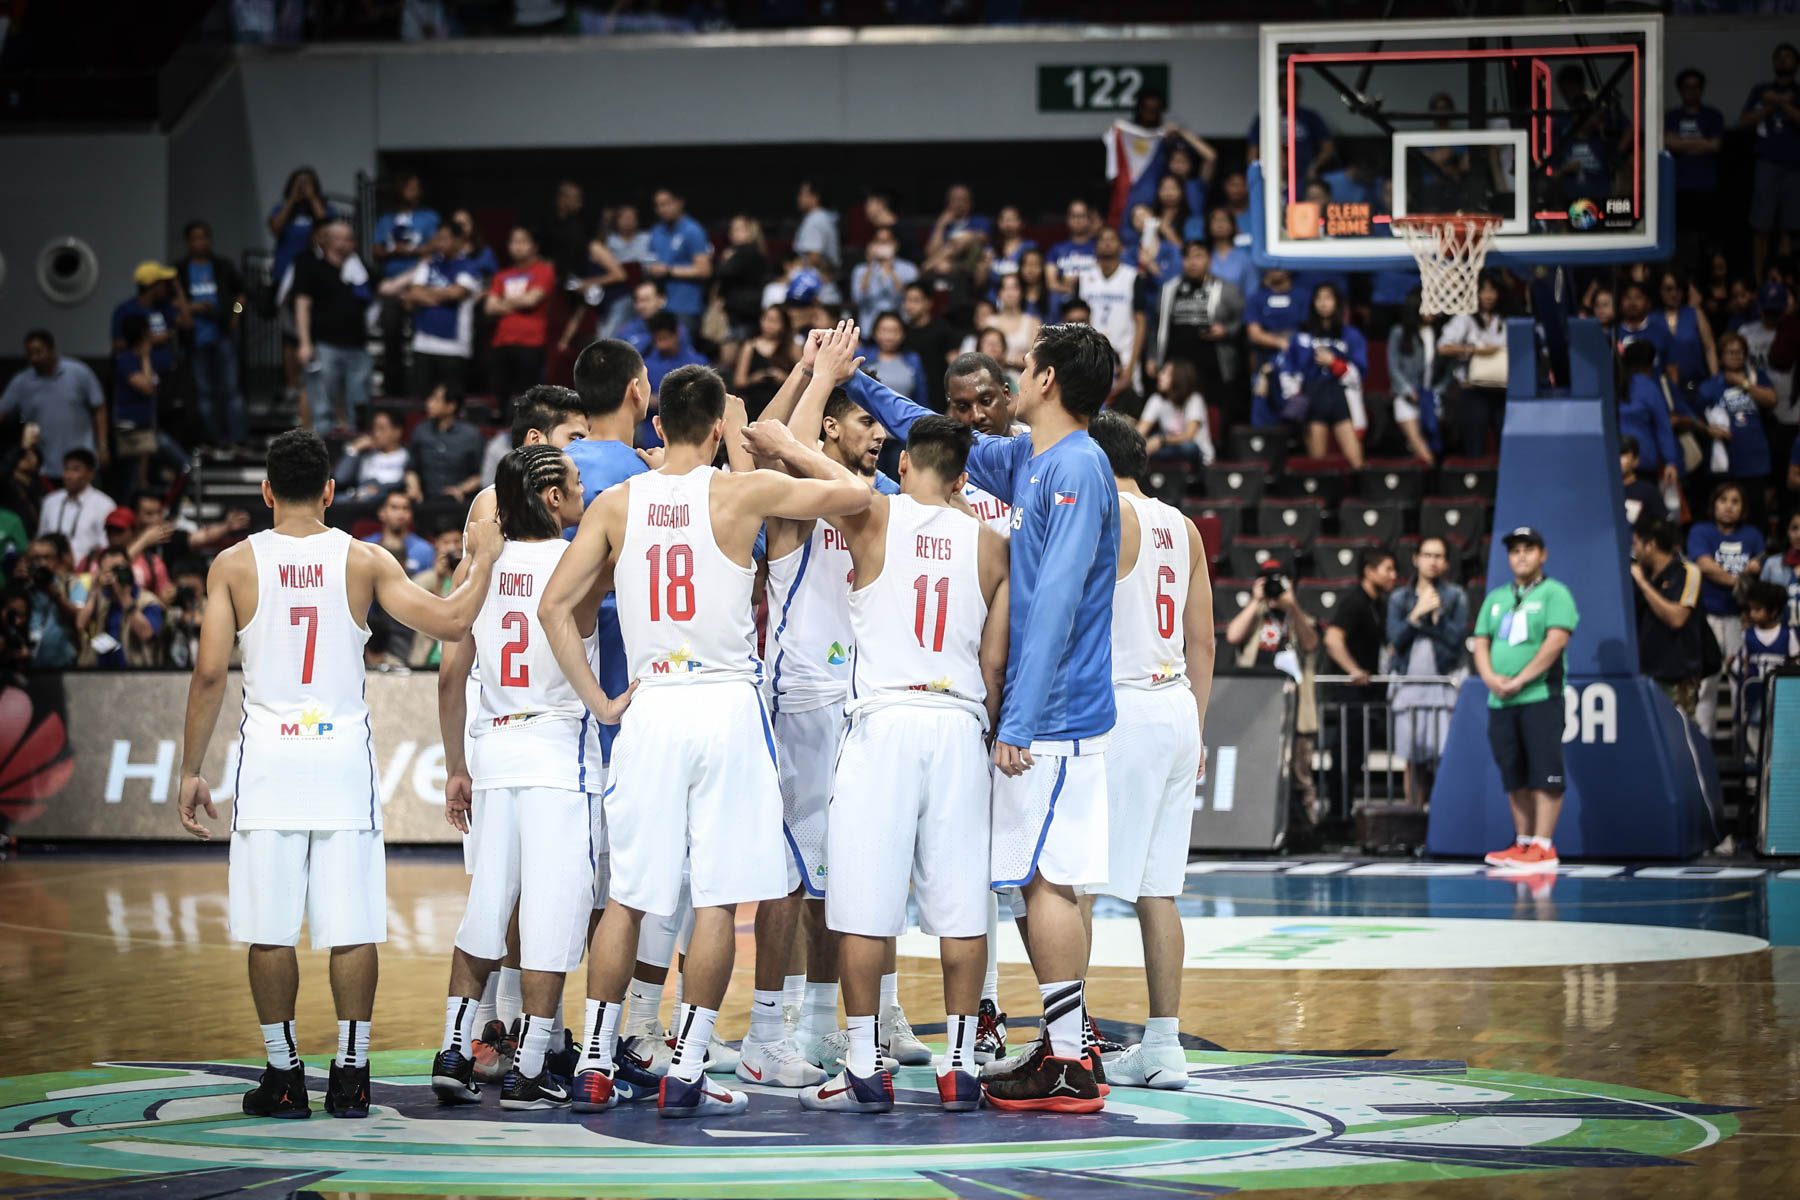 At lowest point, Gilas finds comfort among Filipinos